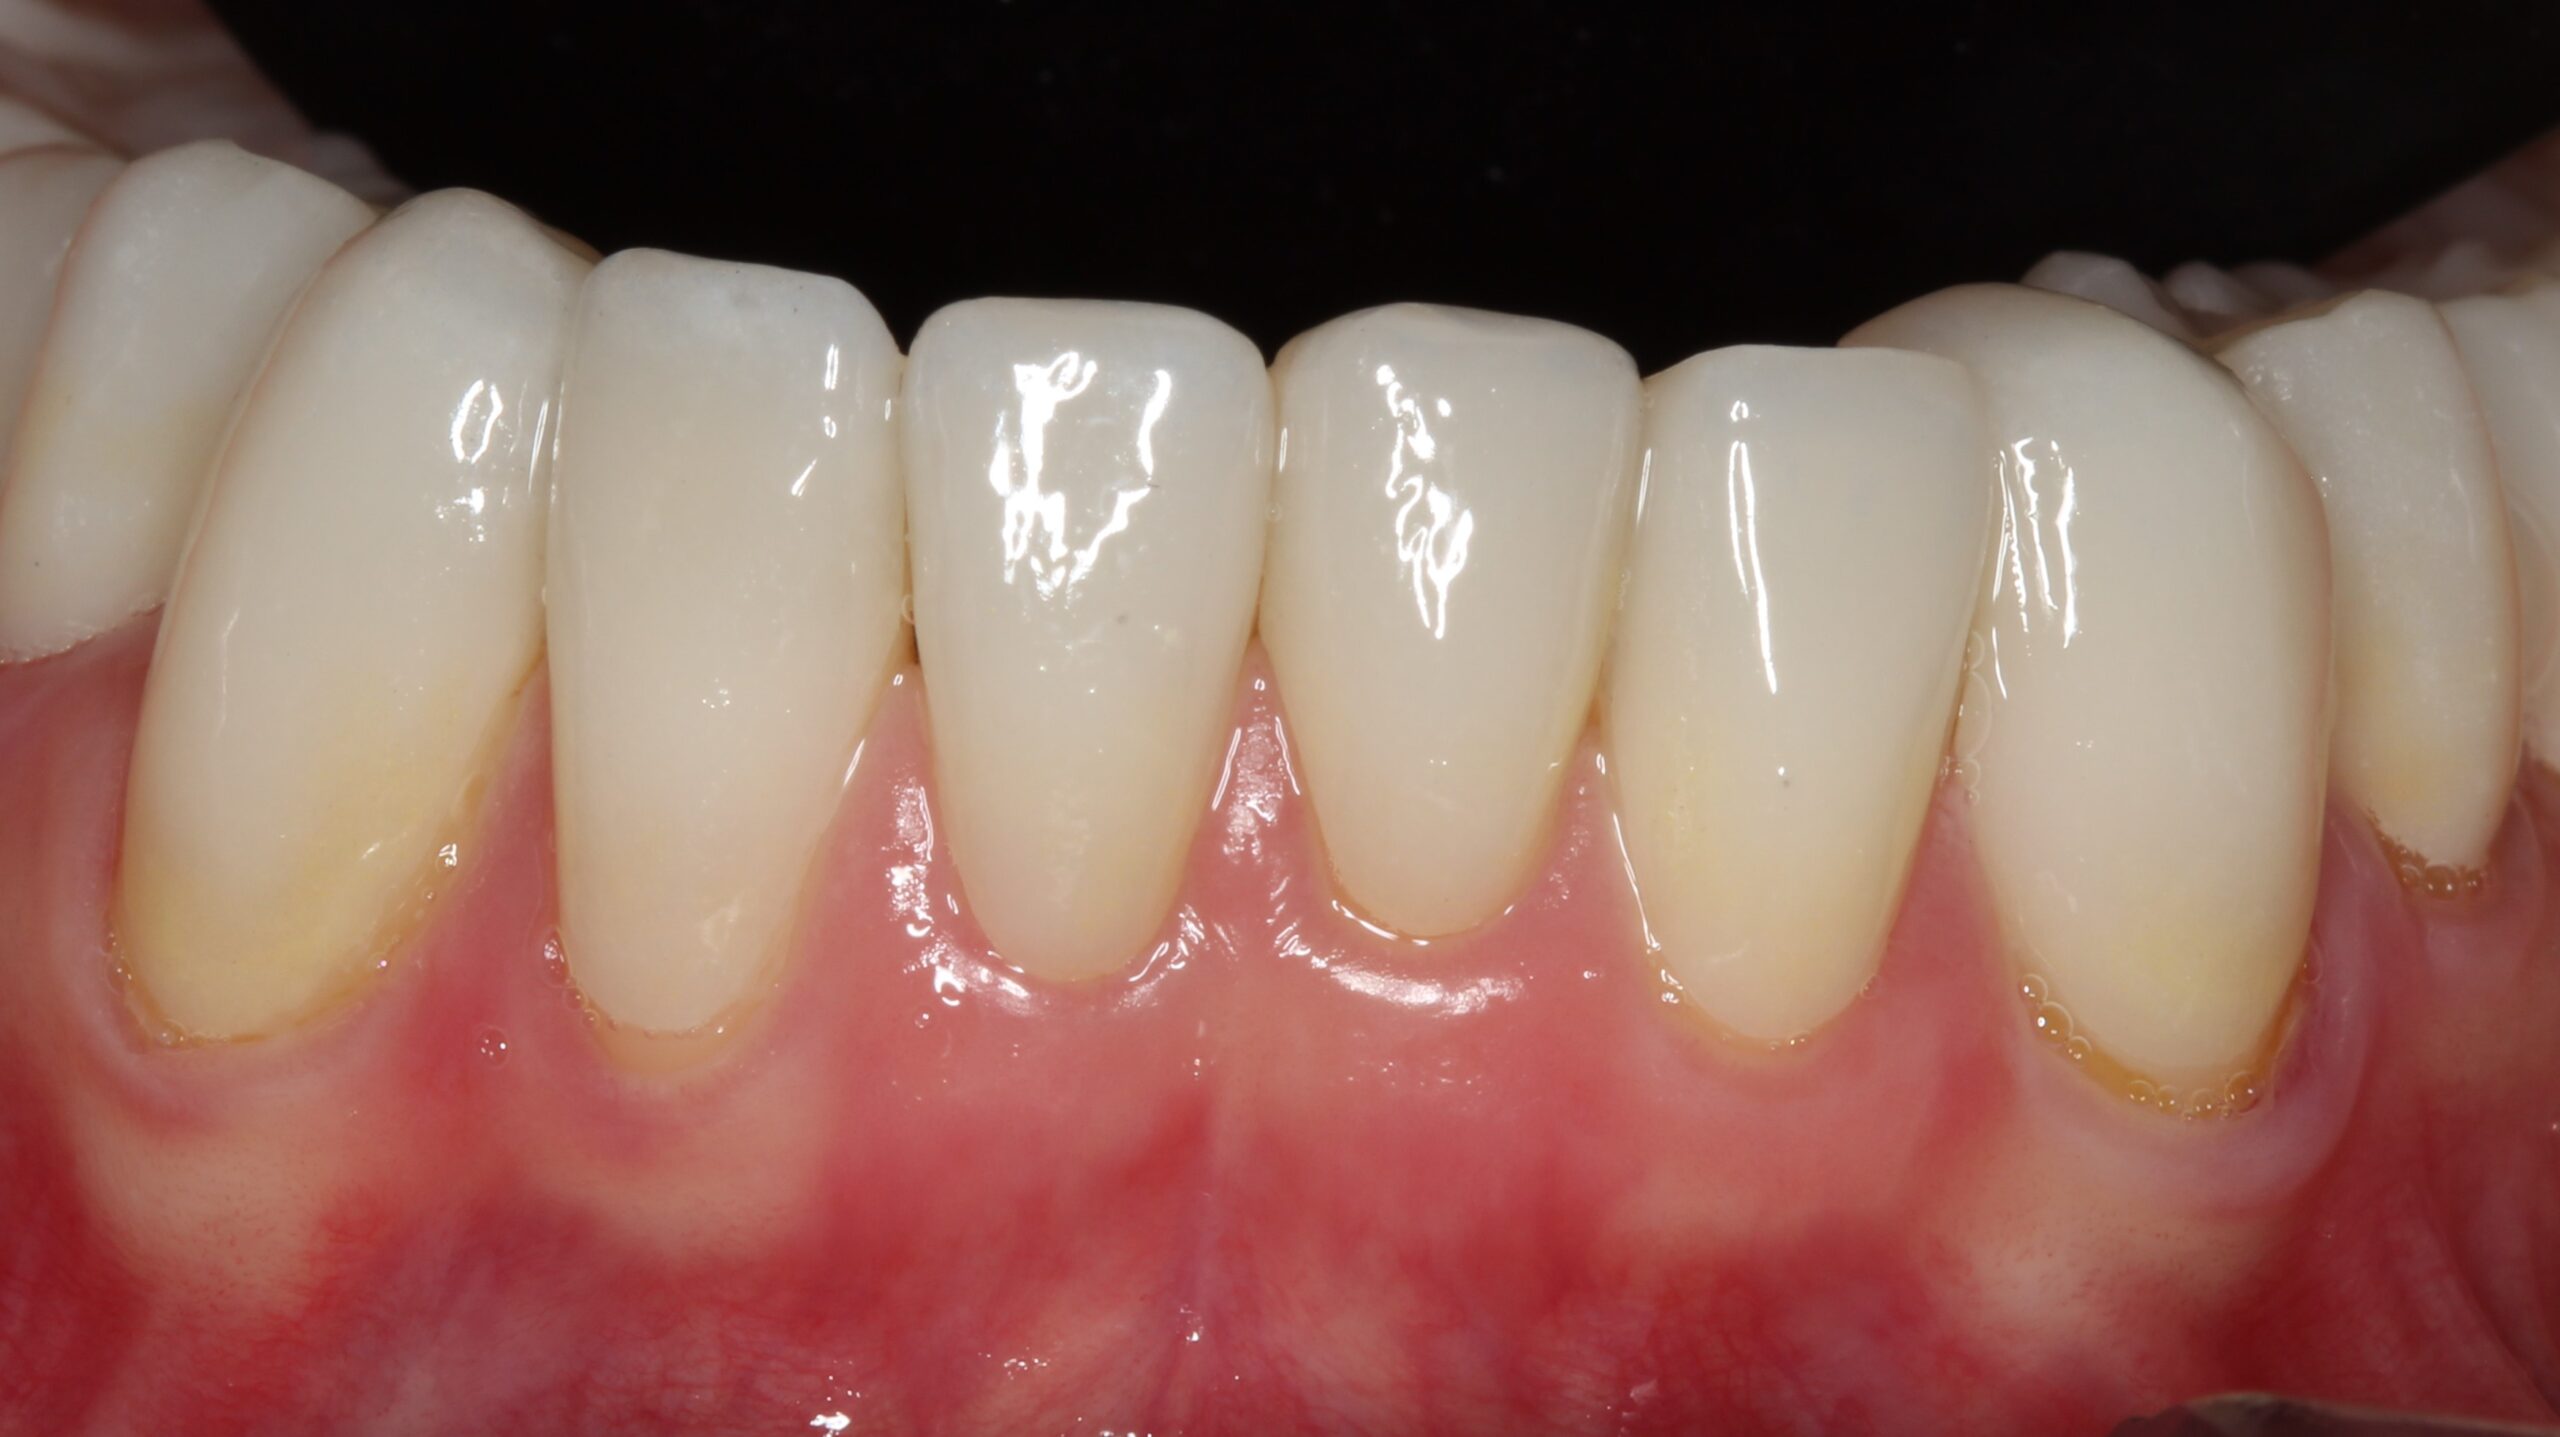 https://mexicoimplantdentistry.com/wp-content/uploads/2022/07/16-scaled.jpg